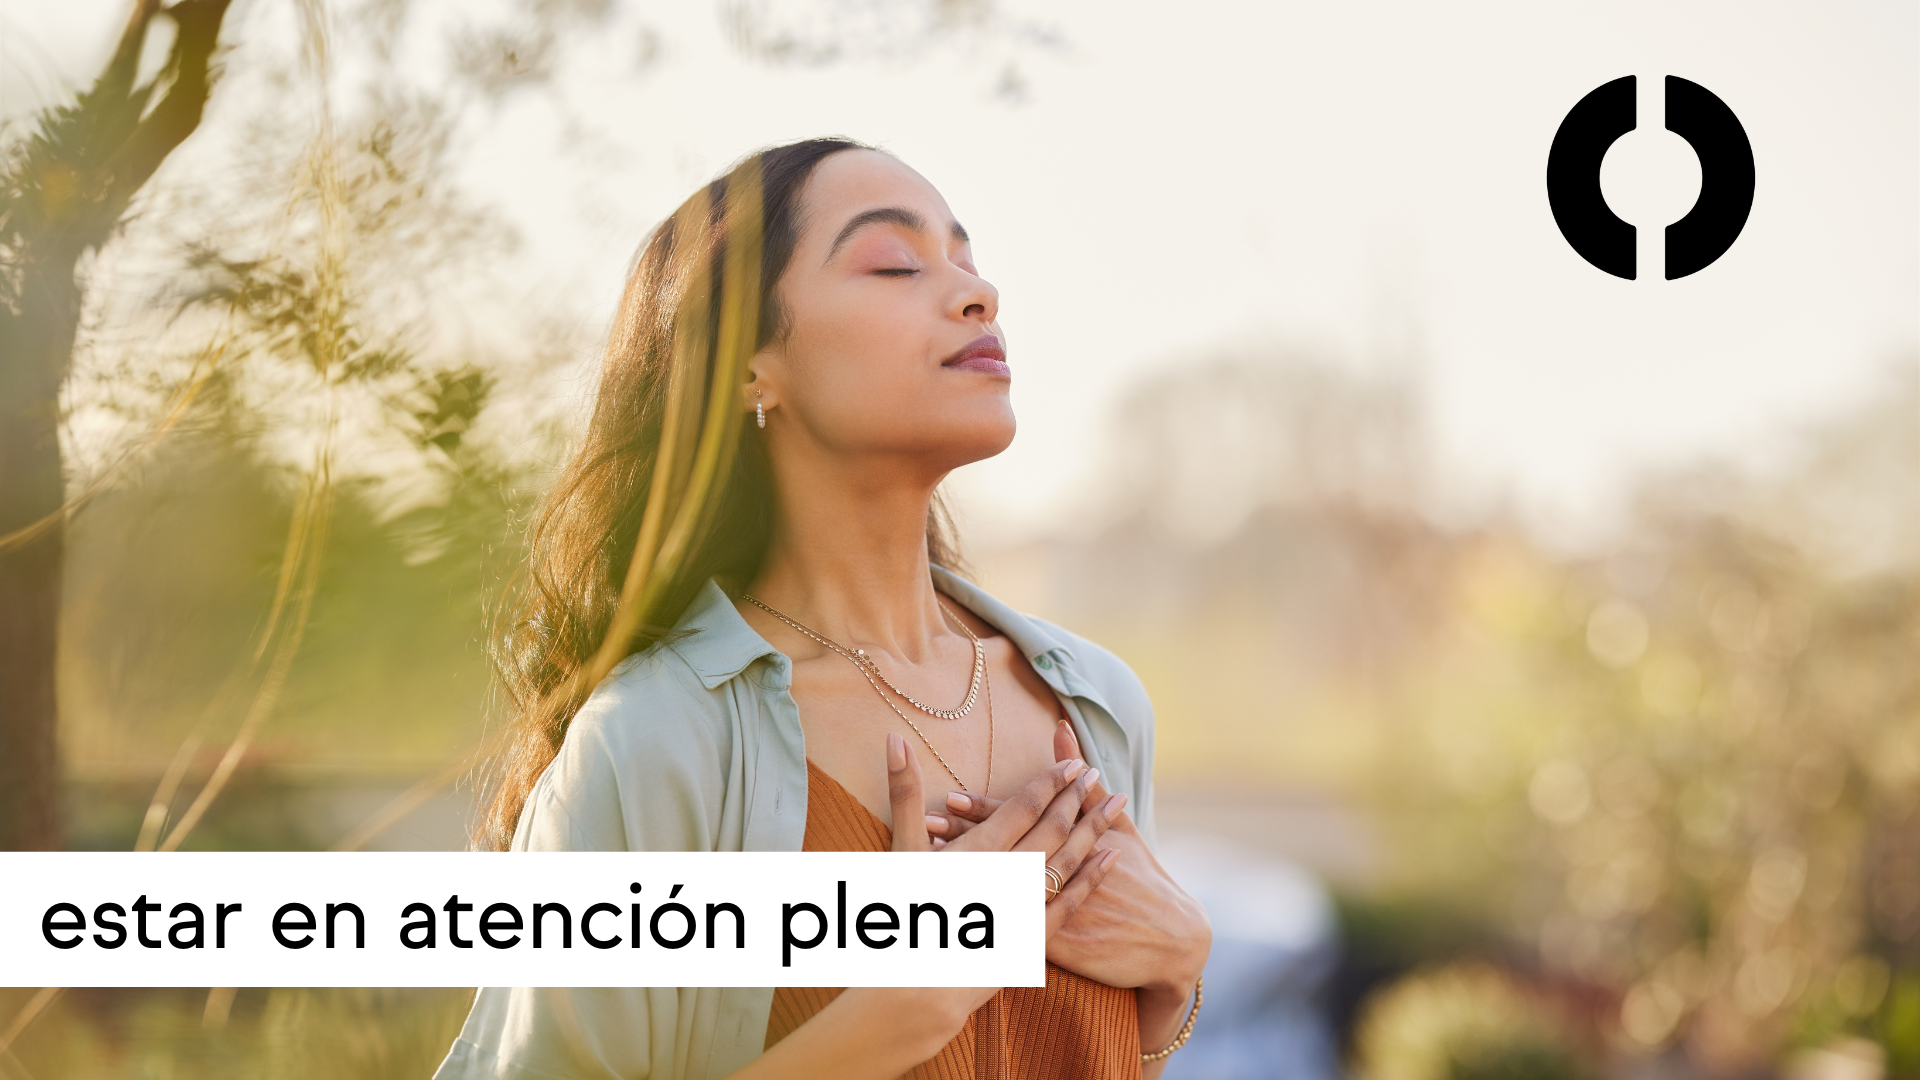 Woman in field taking a deep breath, the image is meant to invoke a calm and relaxing atmosphere. The allcove logo is placed on the top right corner, with text in the bottom left which reads "estar en atención plena."